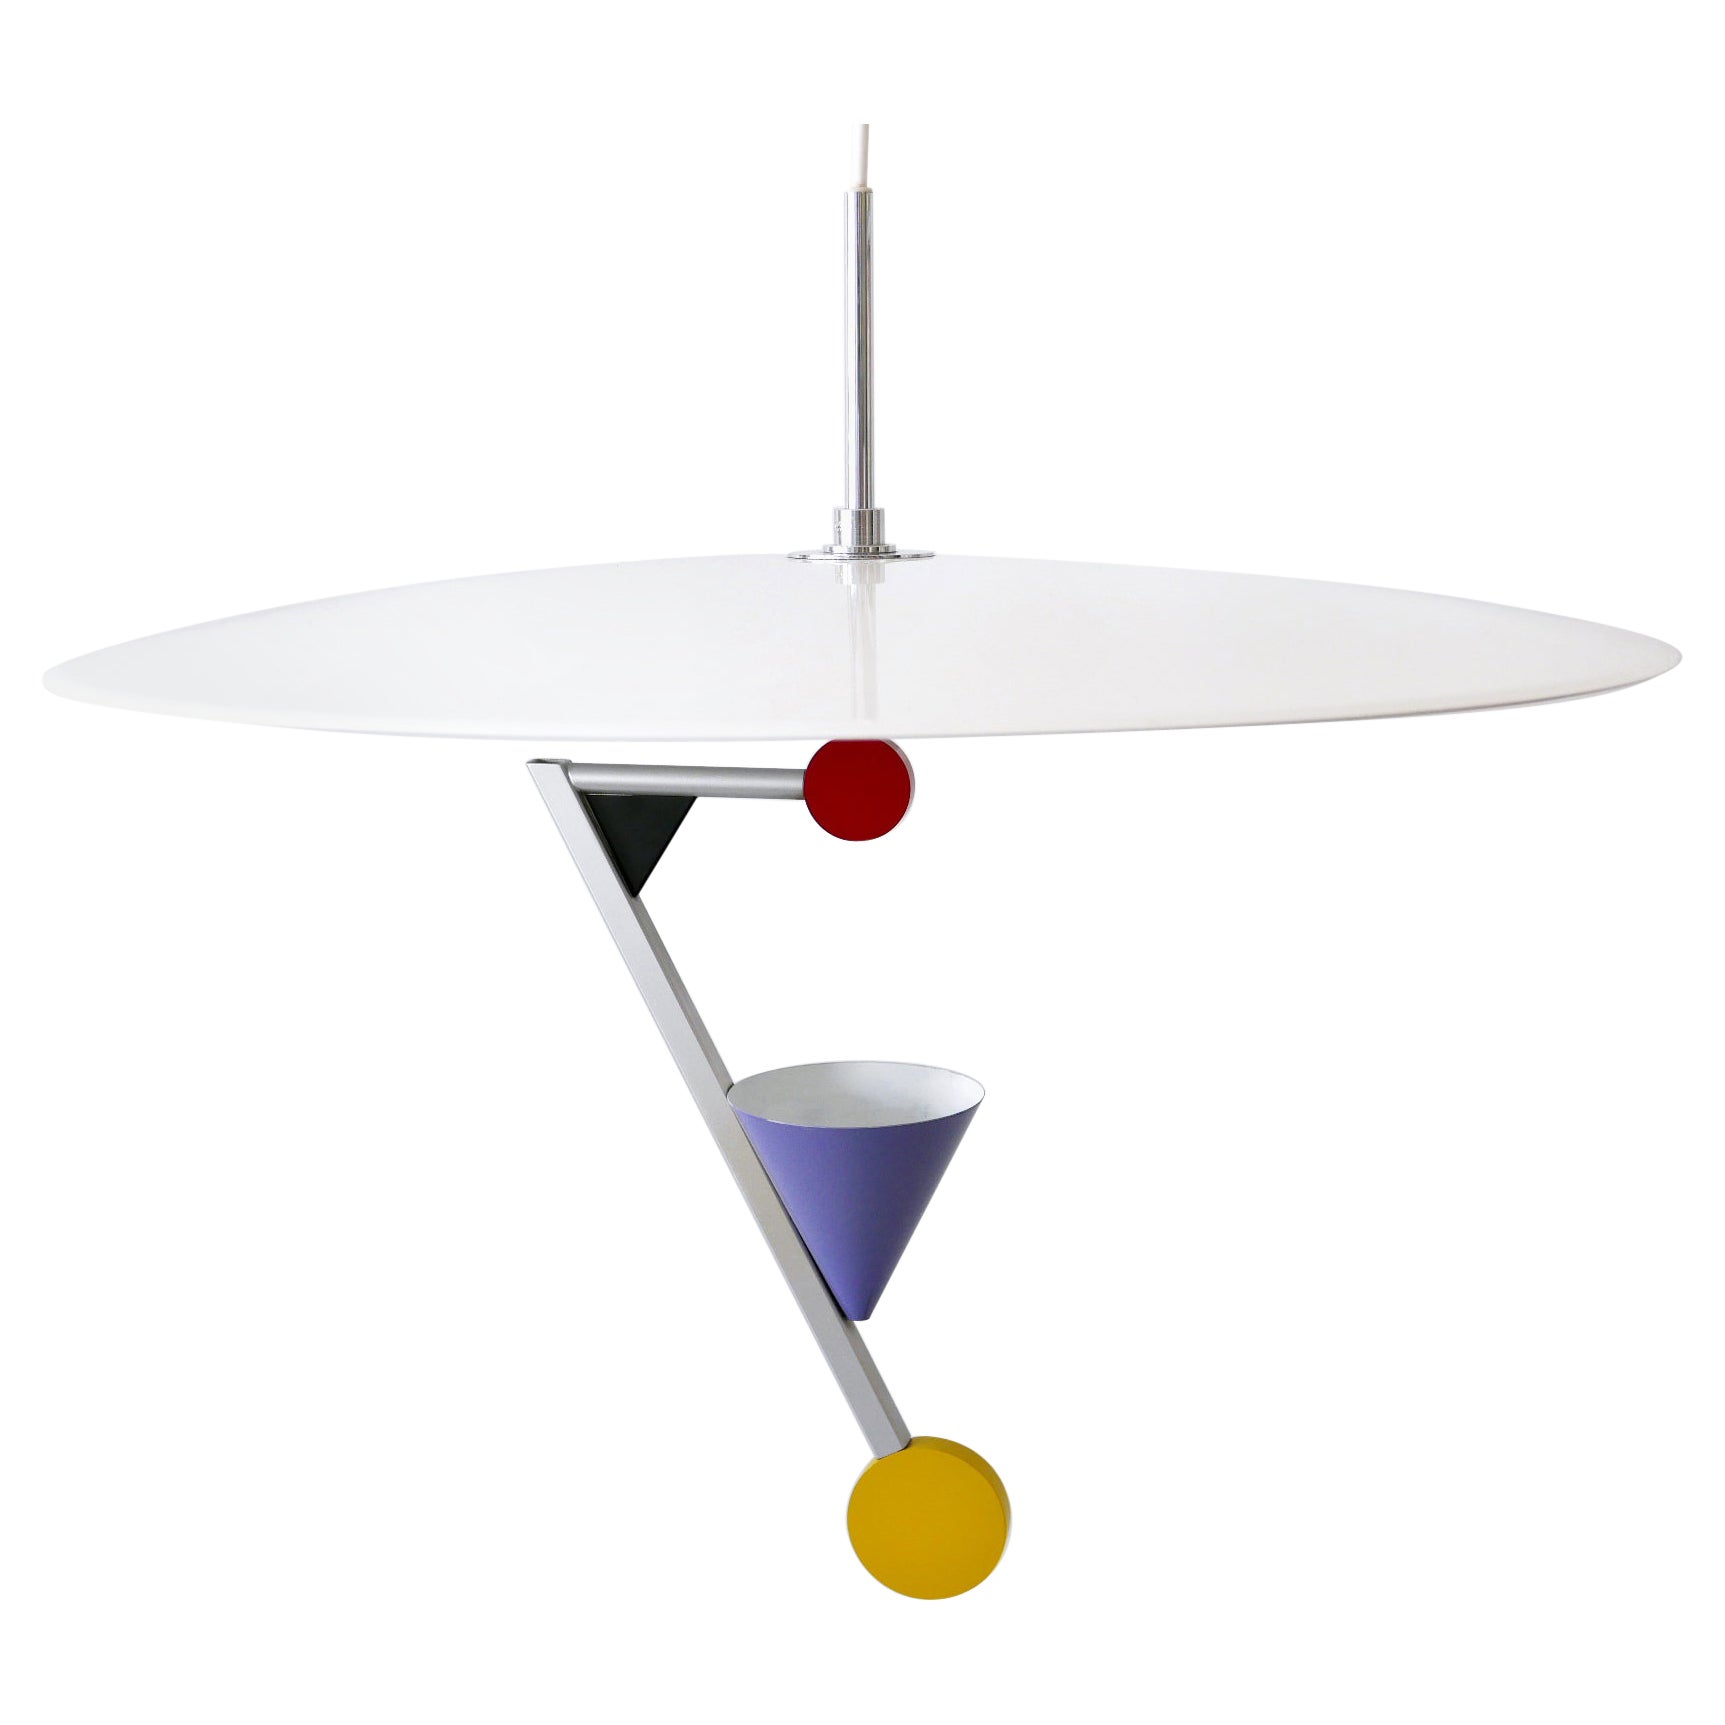 Incroyables lampes suspendues postmodernes Halo There d'Olle Andersson pour Borens 1982 en vente